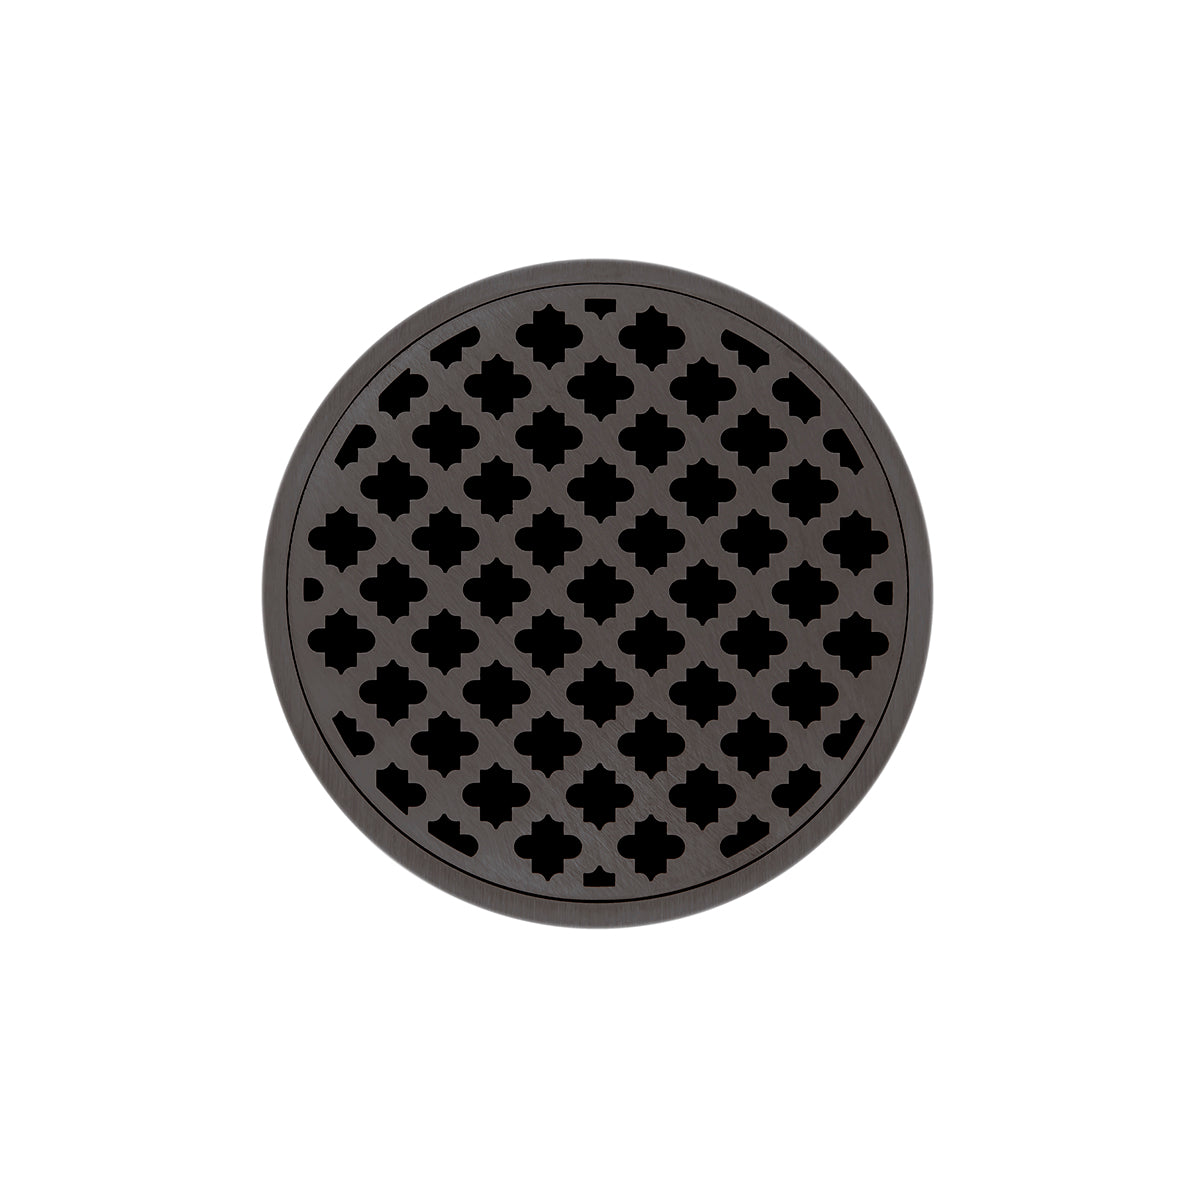 Infinity Drain 5" Round RMD 5 Premium Center Drain Kit with Moor Pattern Decorative Plate with ABS Drain Body, 2" Outlet